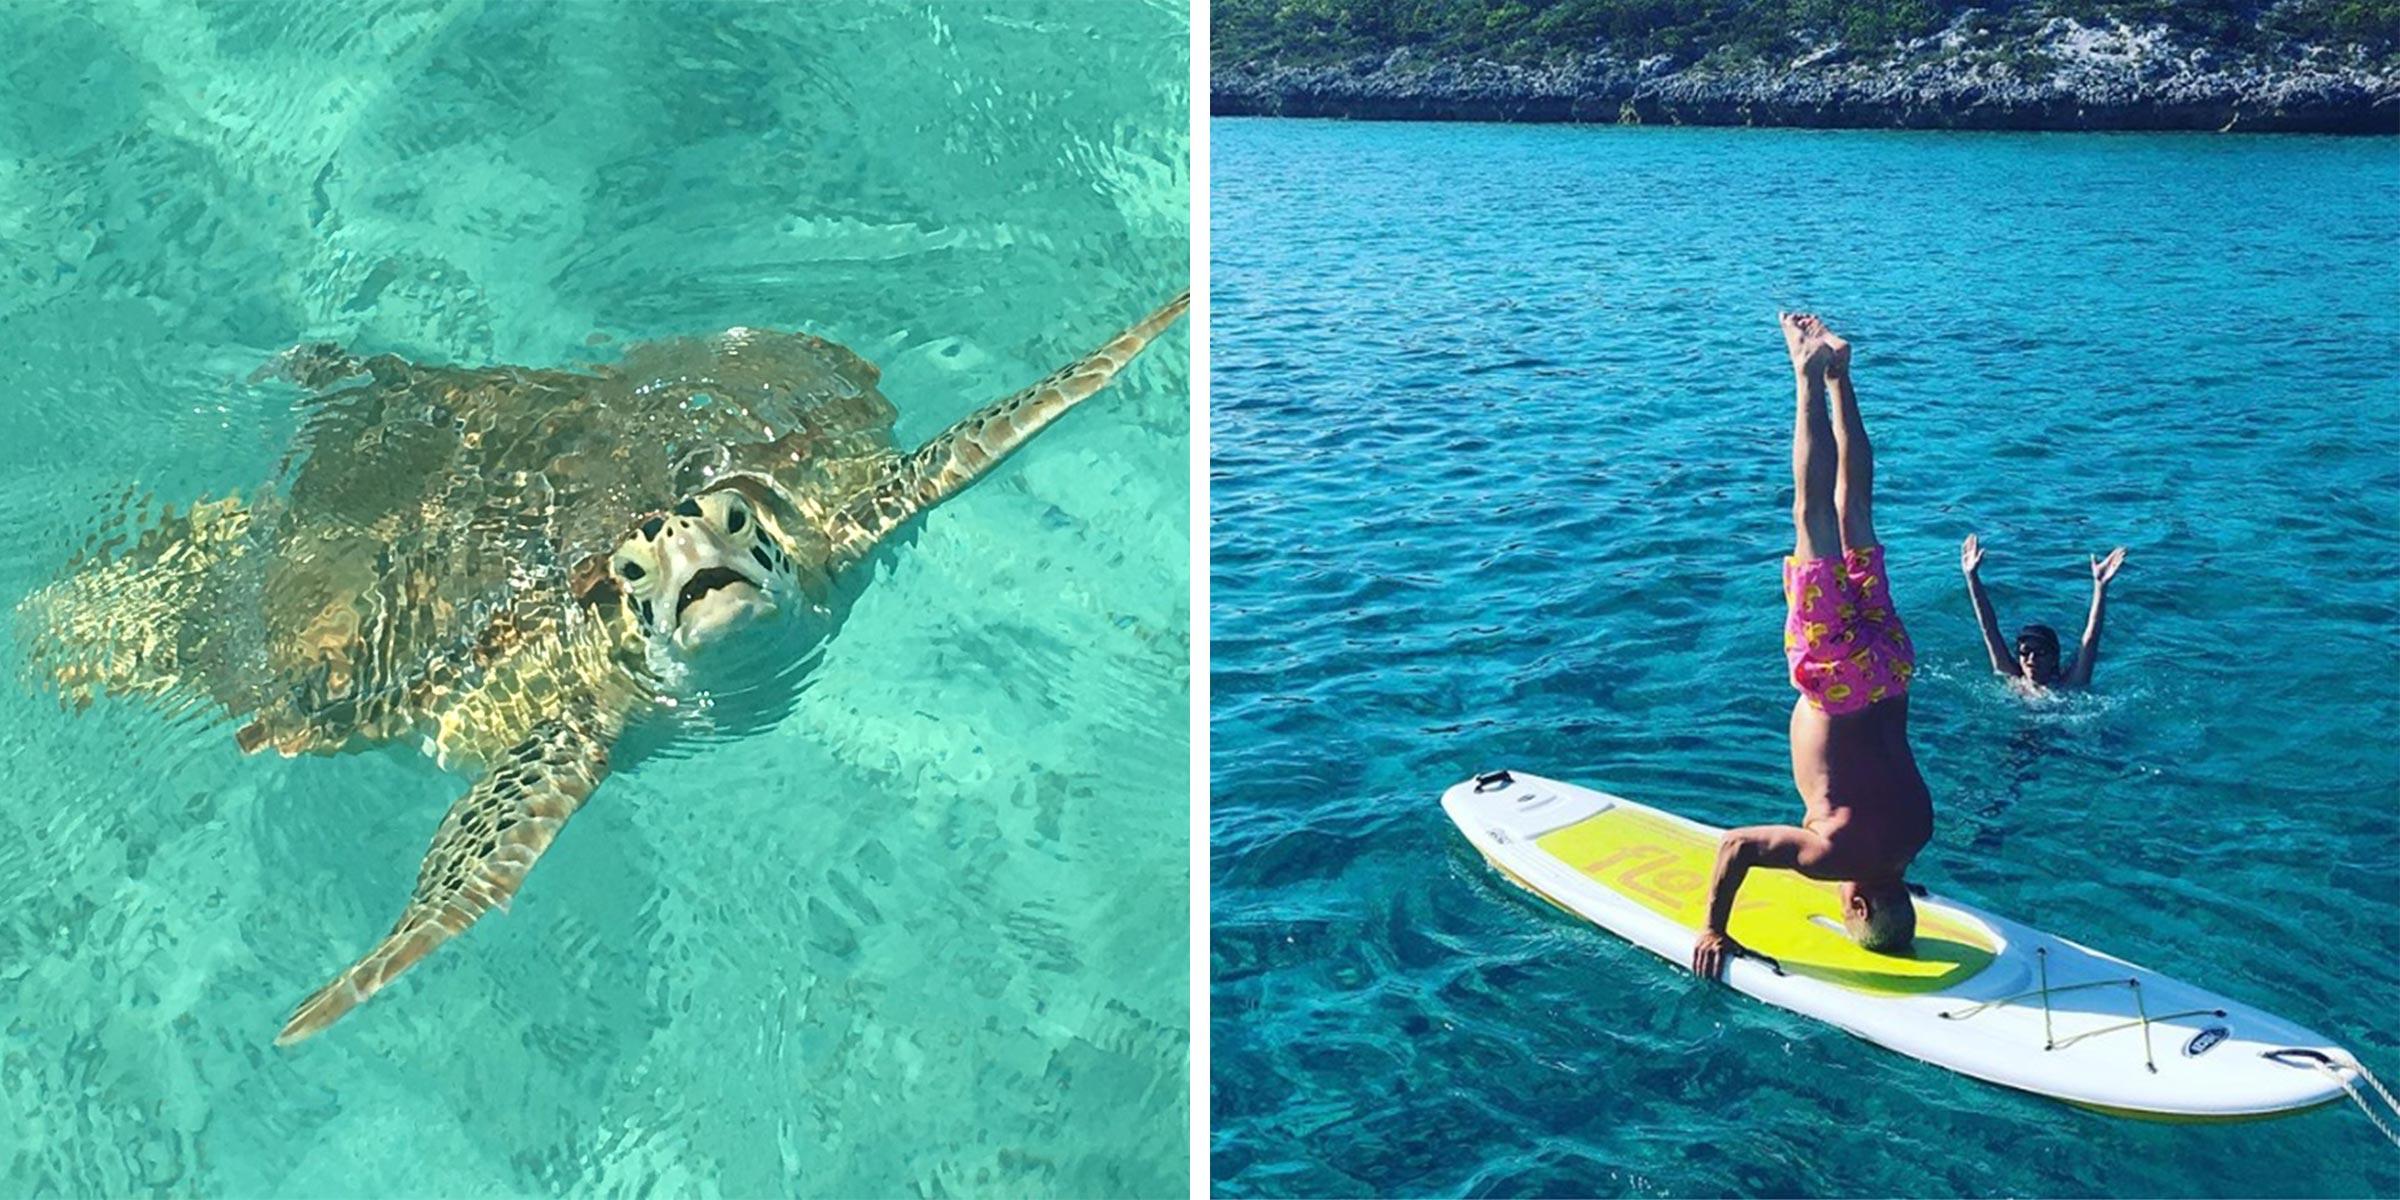 Turtle spotting and water sports fun in the Exumas